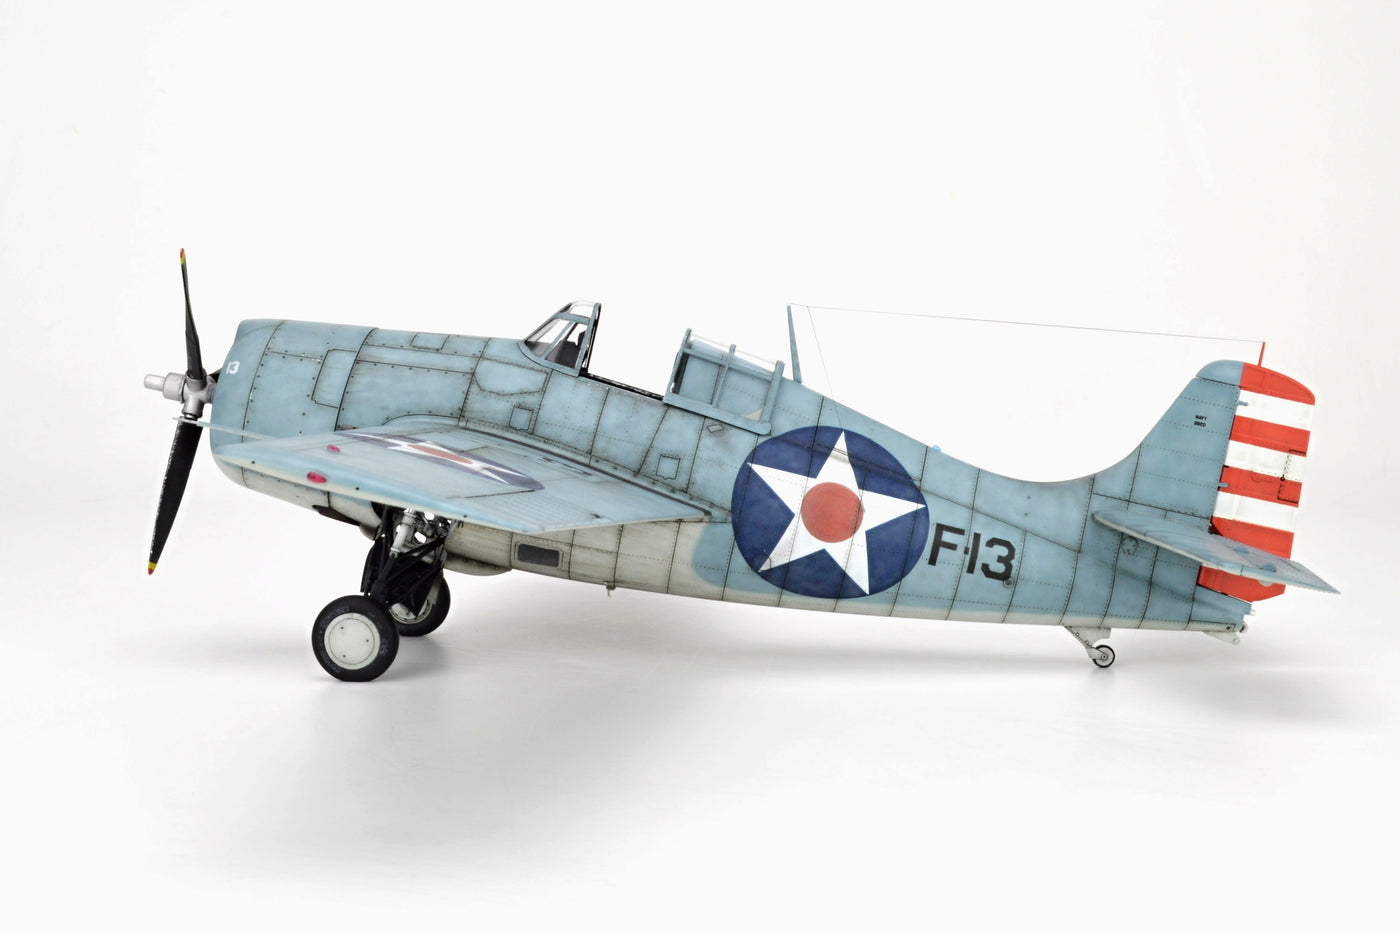 1/48 MIDWAY DUAL COMBO Limited edition